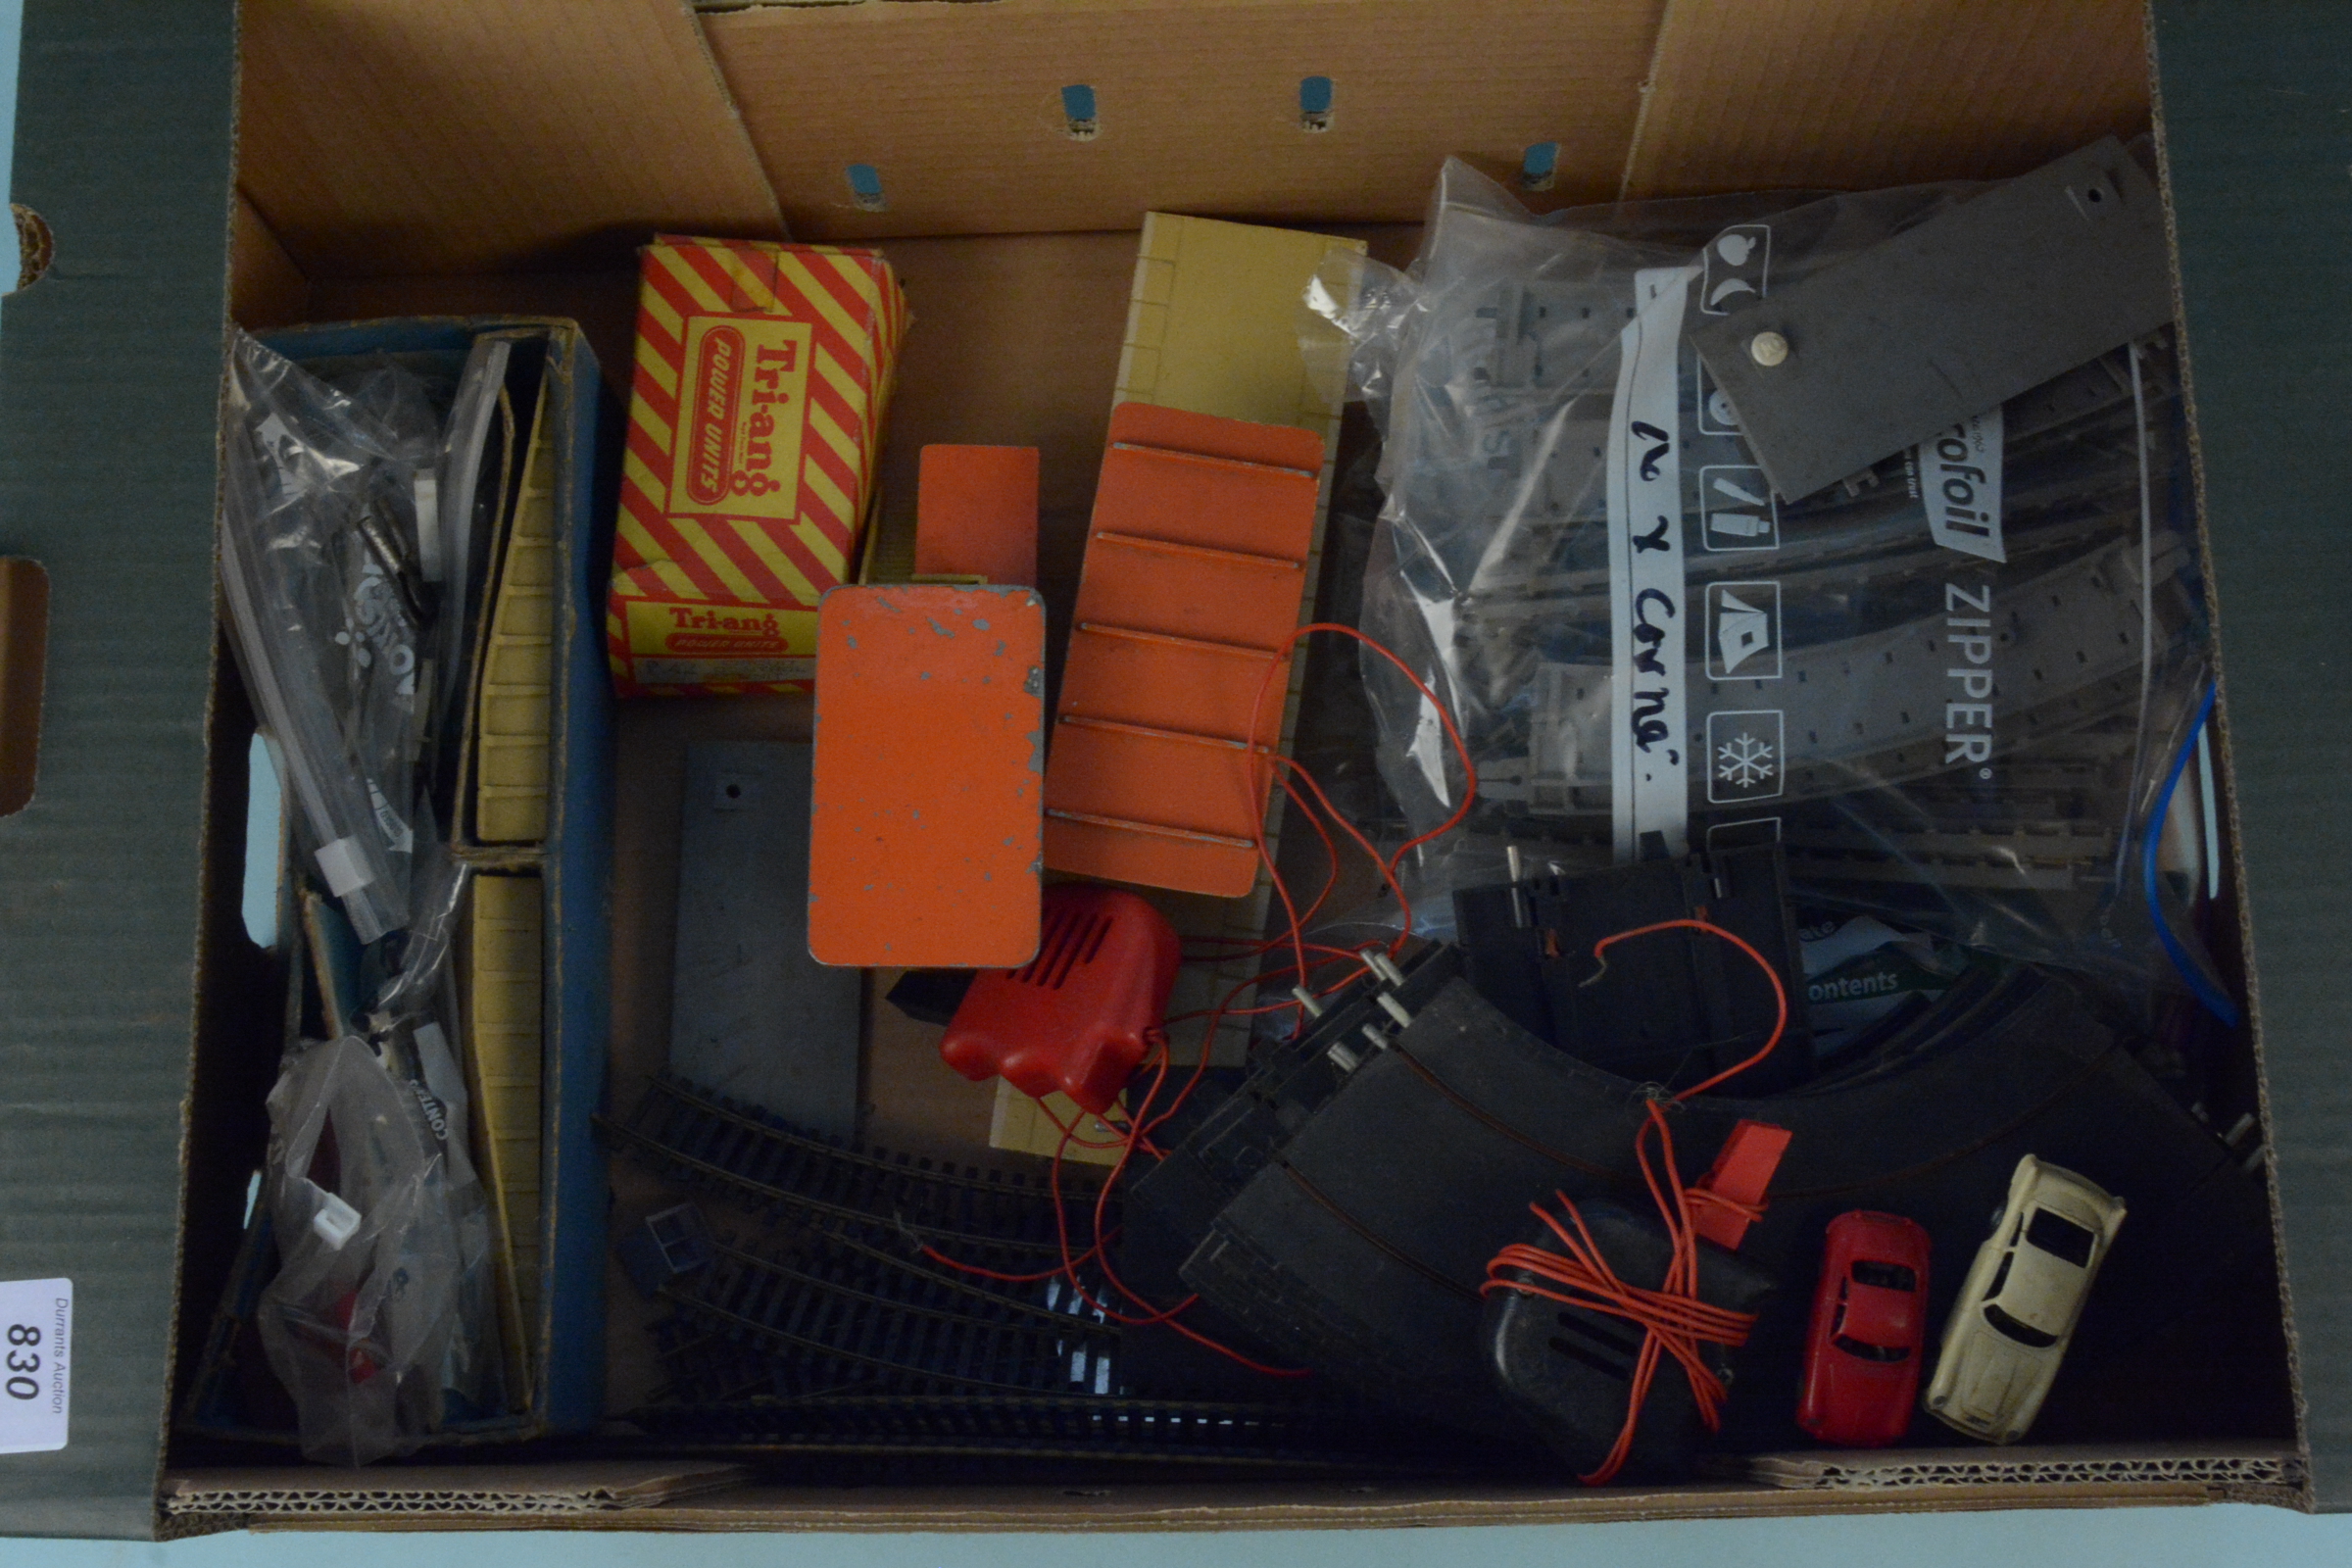 A box of Hornby and Triang train accessories including station buildings,